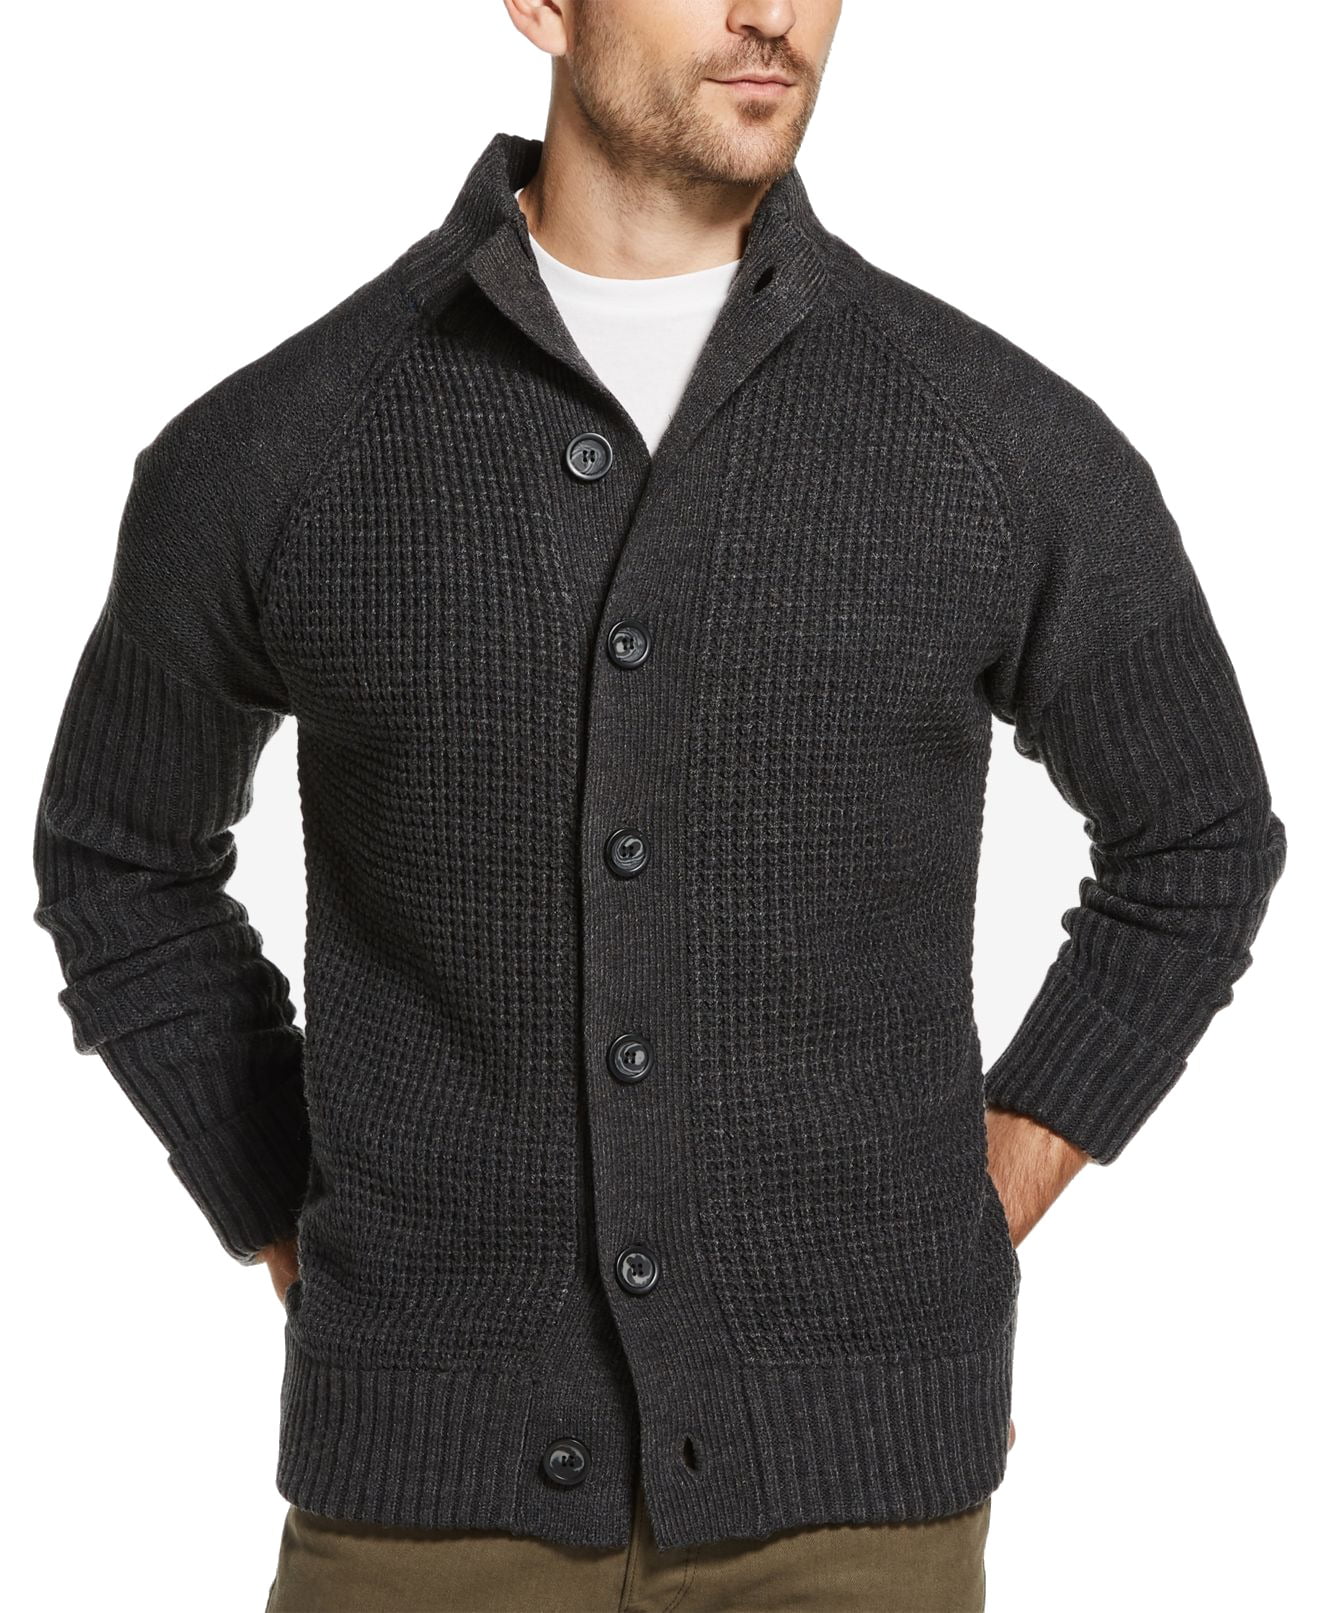 Weatherproof Vintage - Mens Sweater Button Front Waffle Cardigan 3XL ...